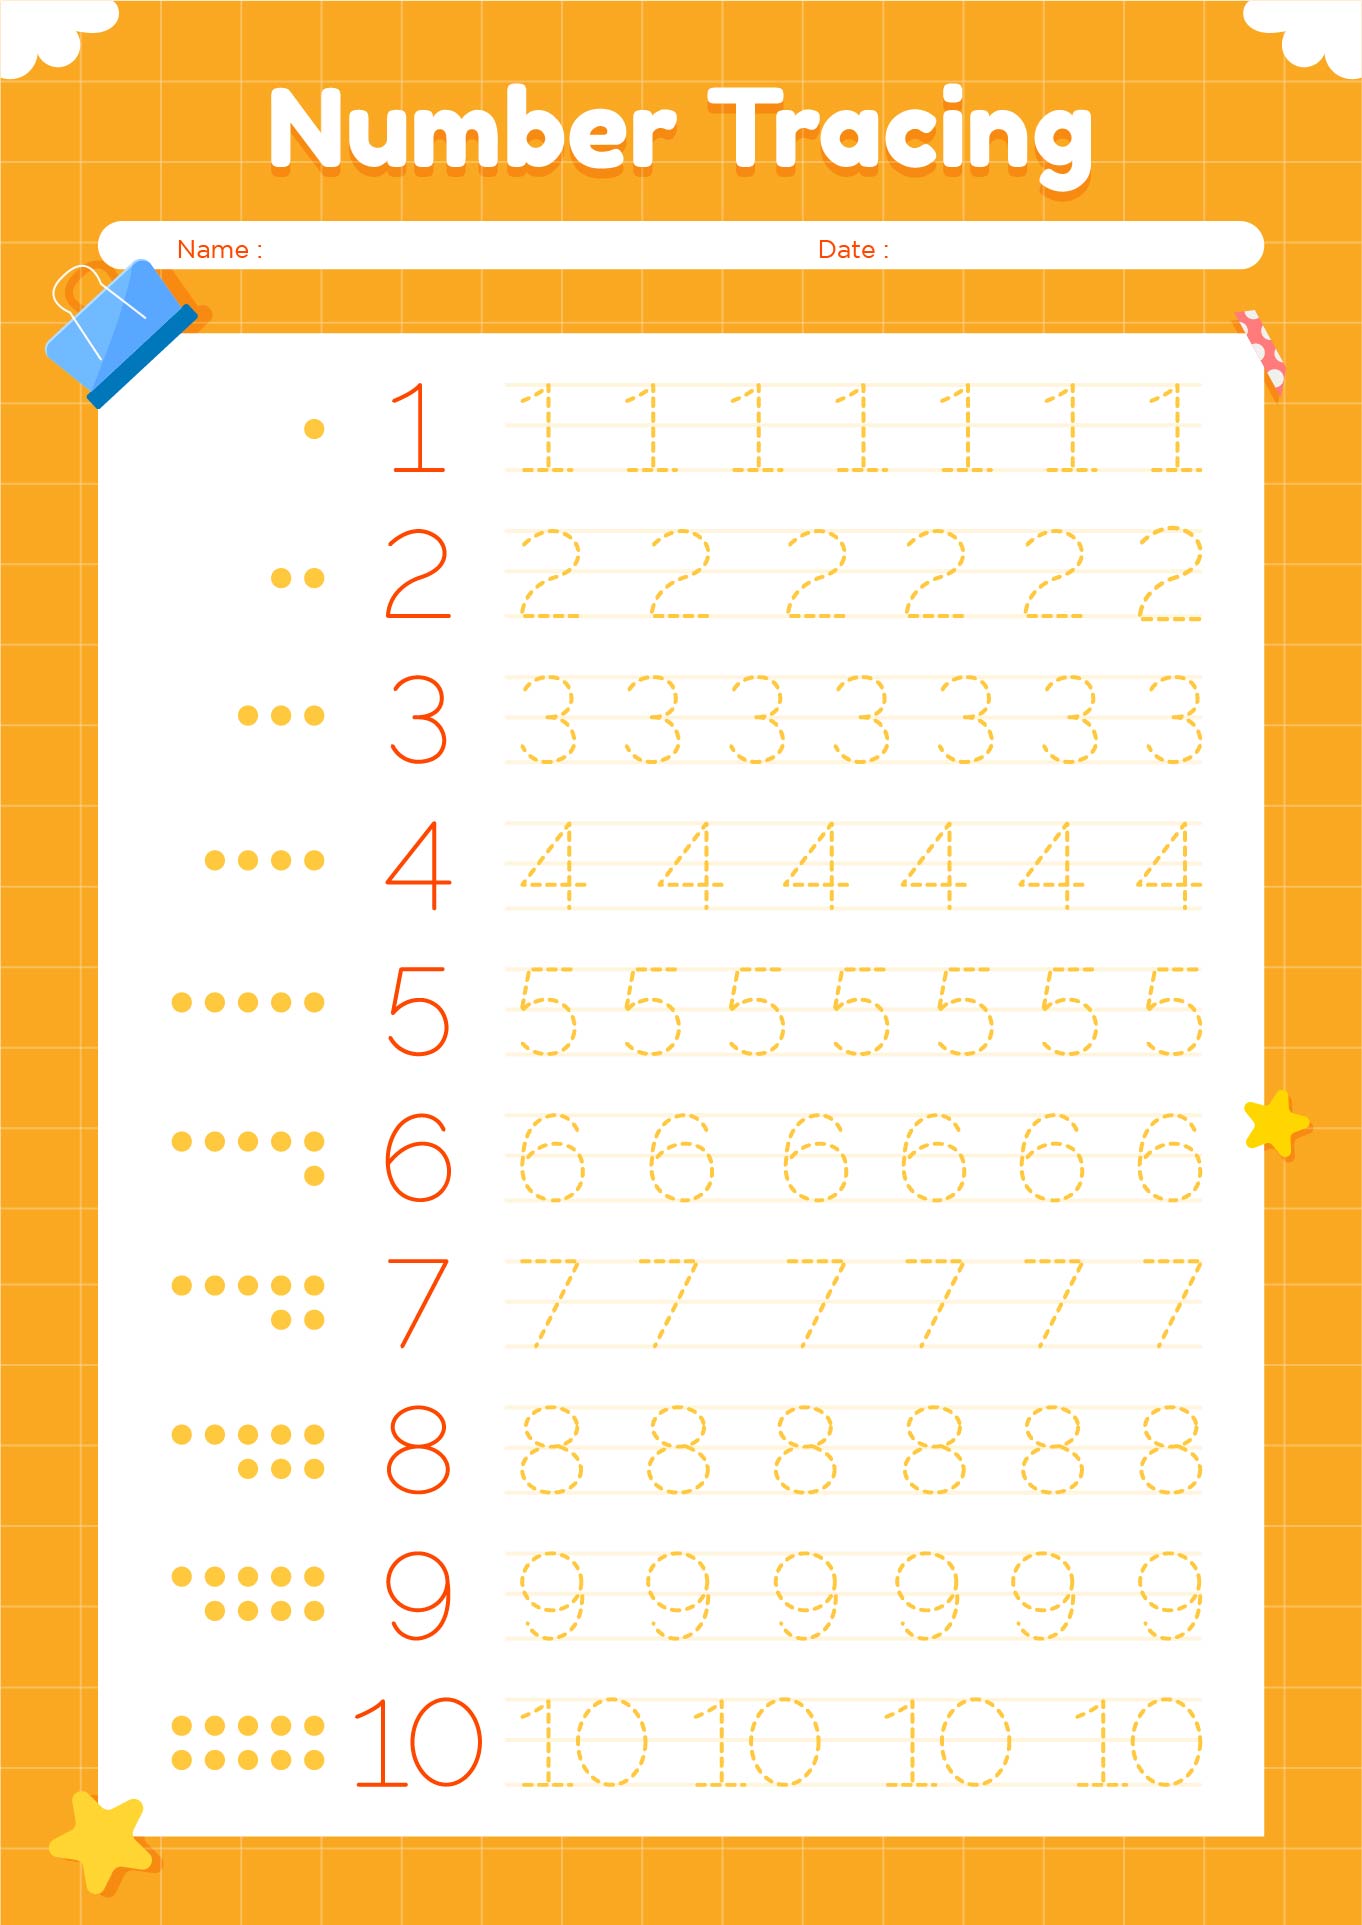 PrintablePrintable Number Tracing Worksheets For Preschool 1 To 10 And Counting